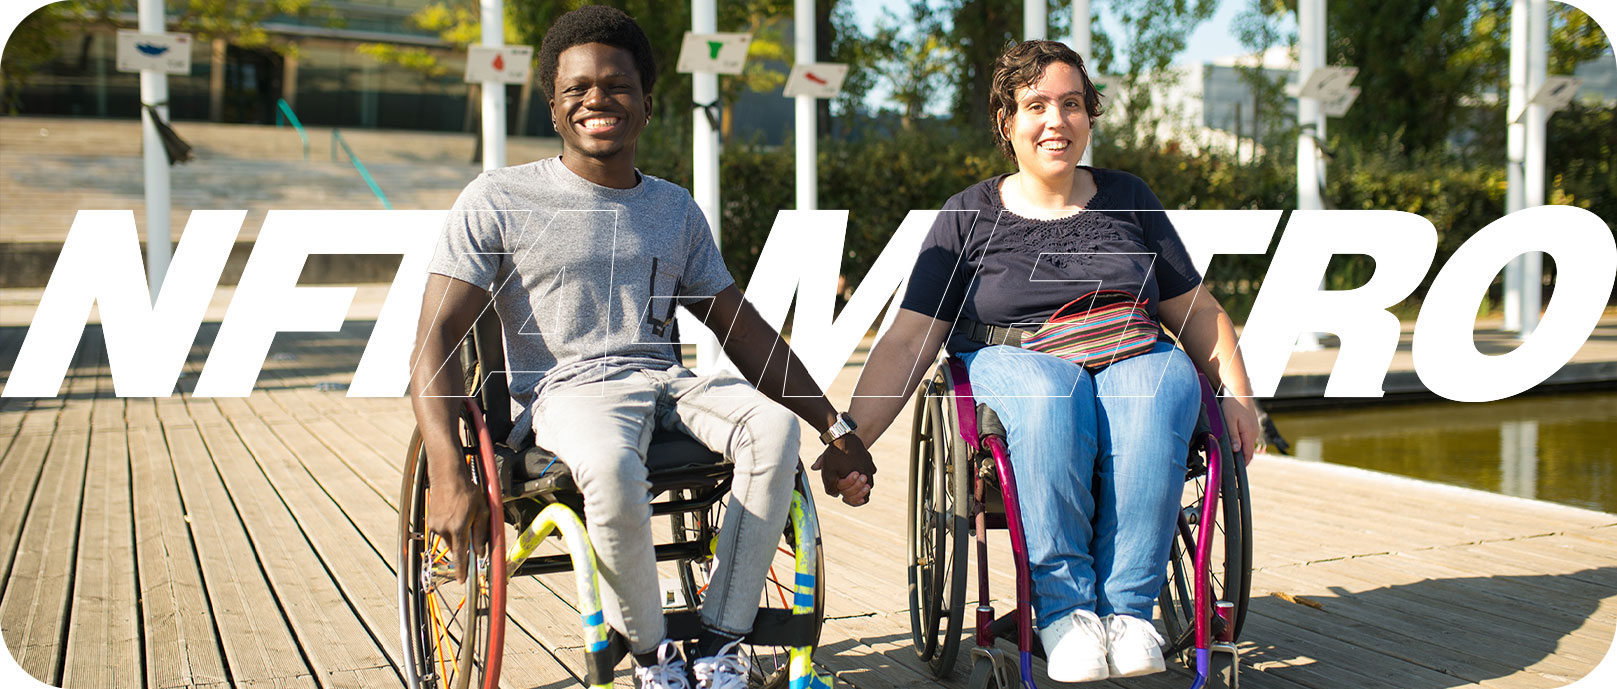 Two people in mobility devices, smiling and holding hands, in front of the words "NFTA METRO"